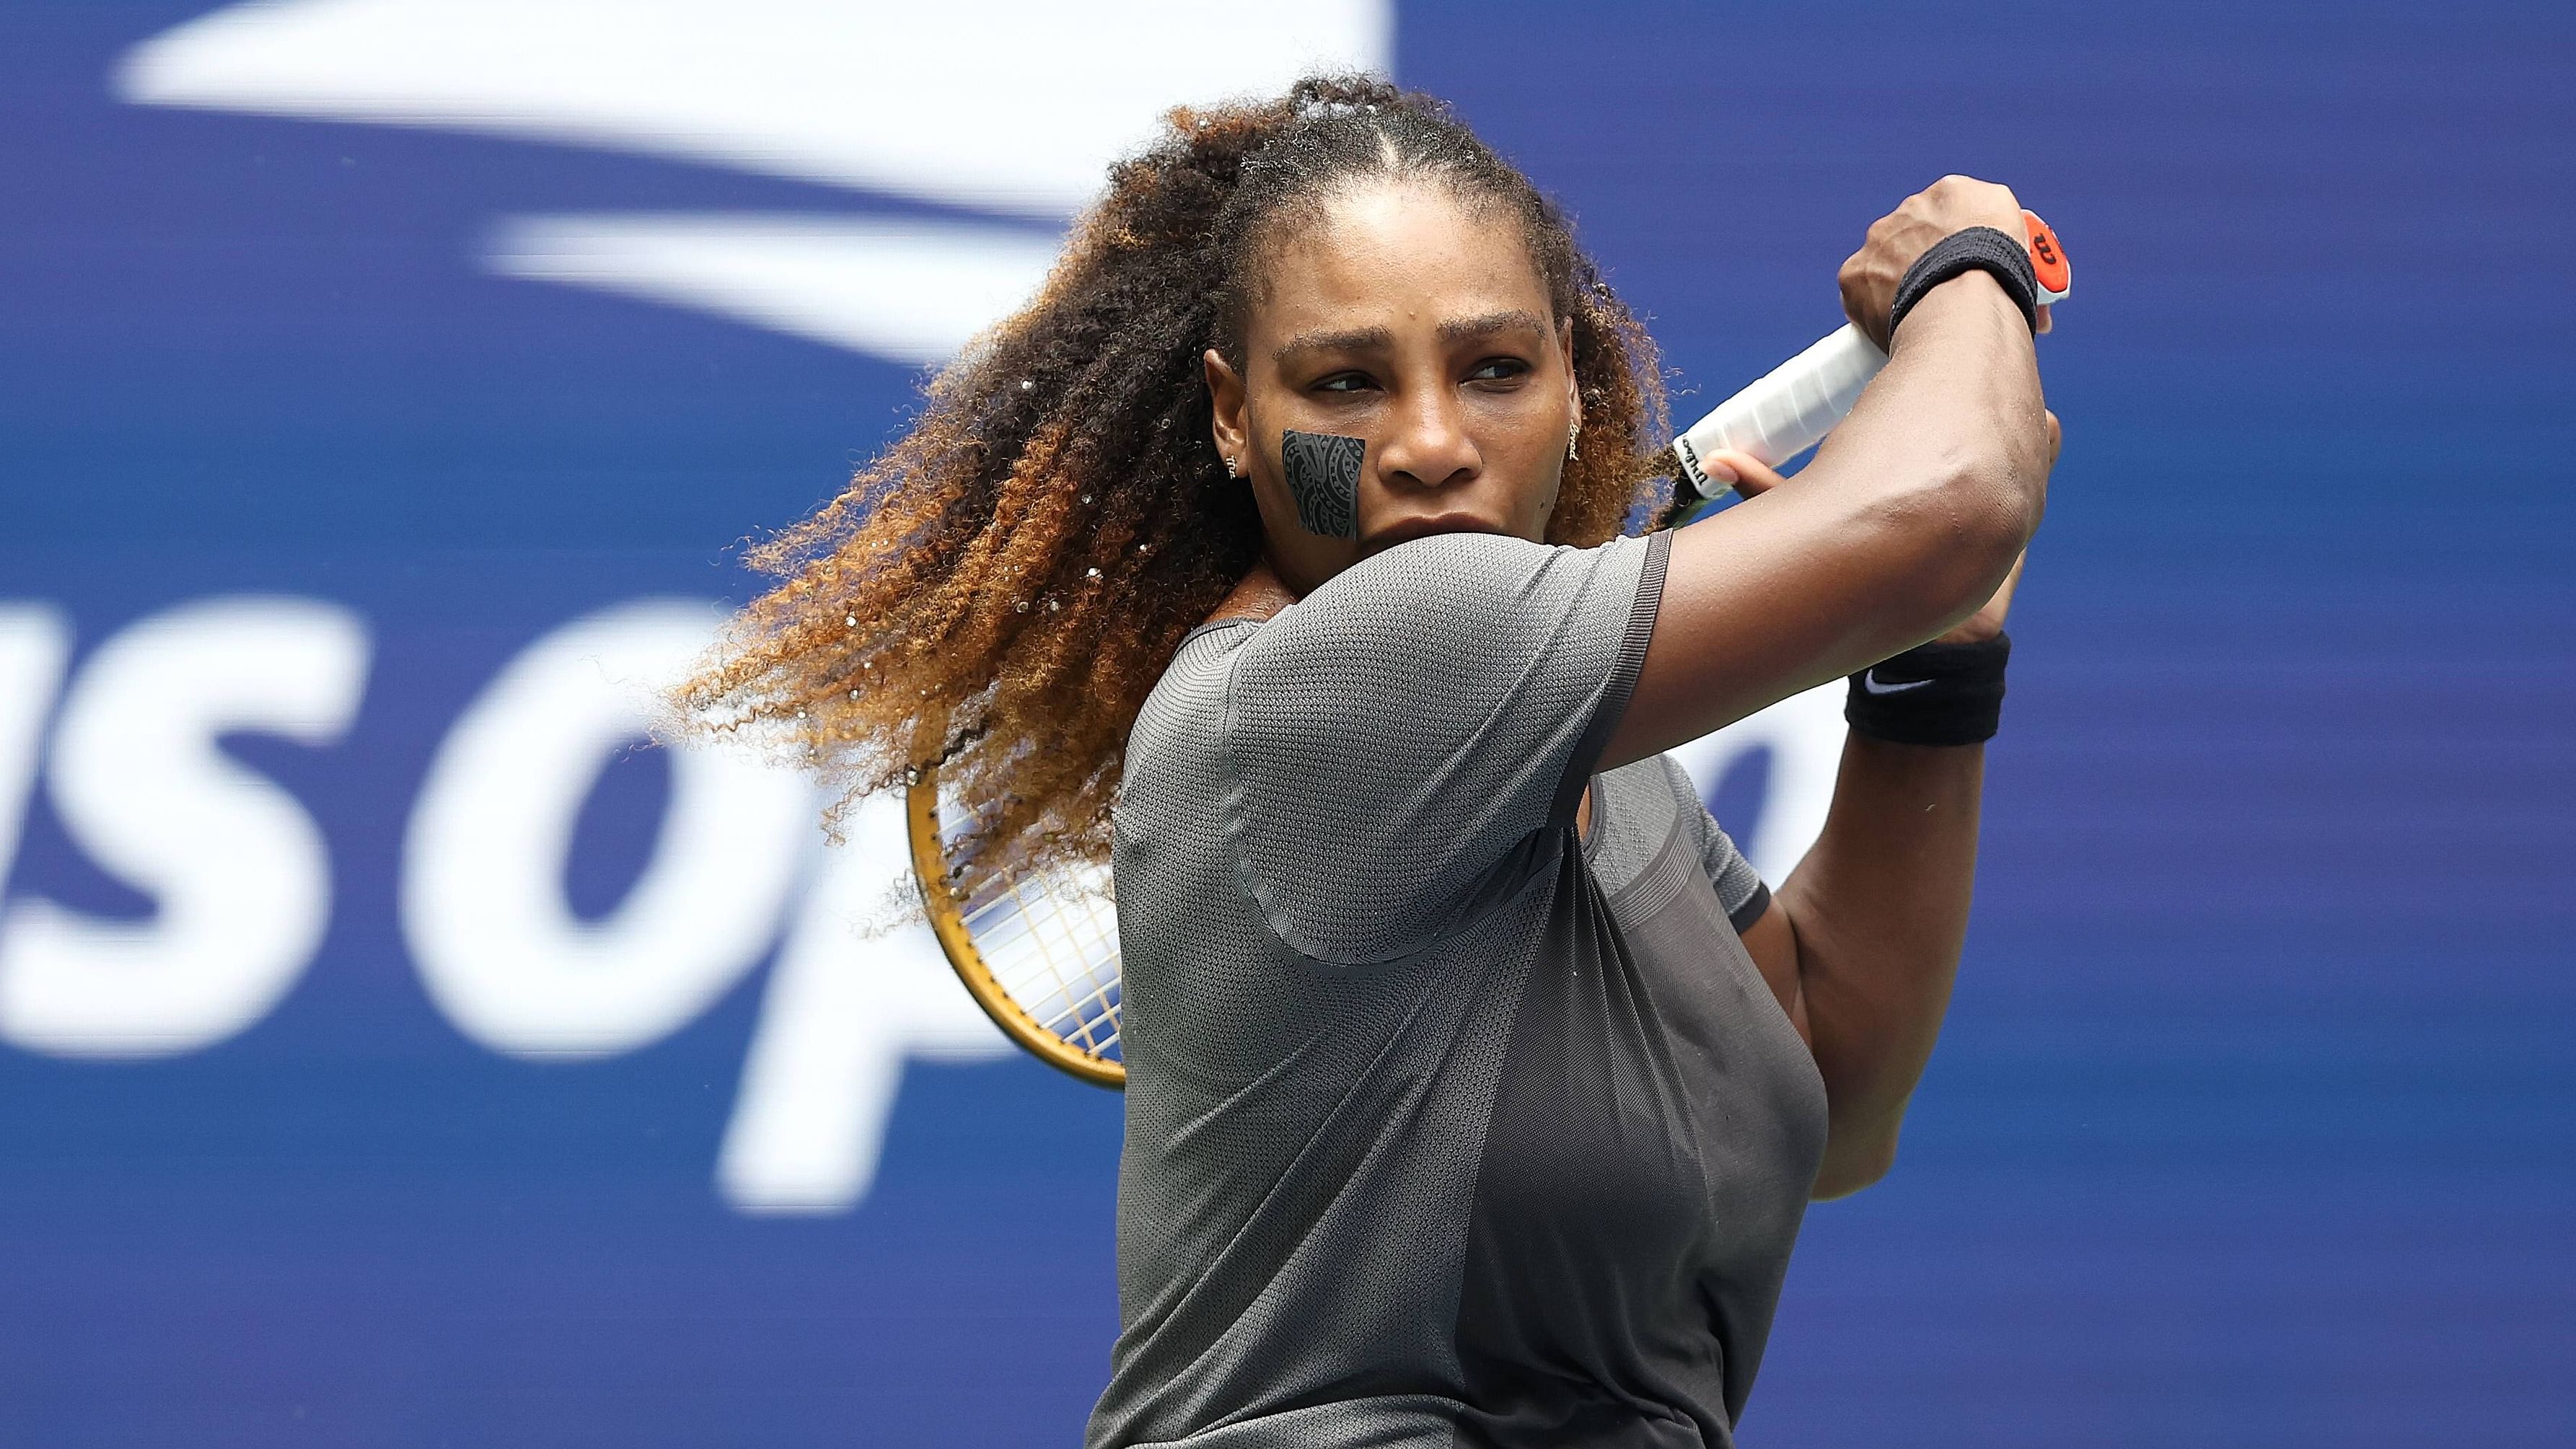 A successful Black woman in a predominantly white sport, she has beaten the odds, and talented opponents from multiple generations, across four decades. Credit: AFP Photo